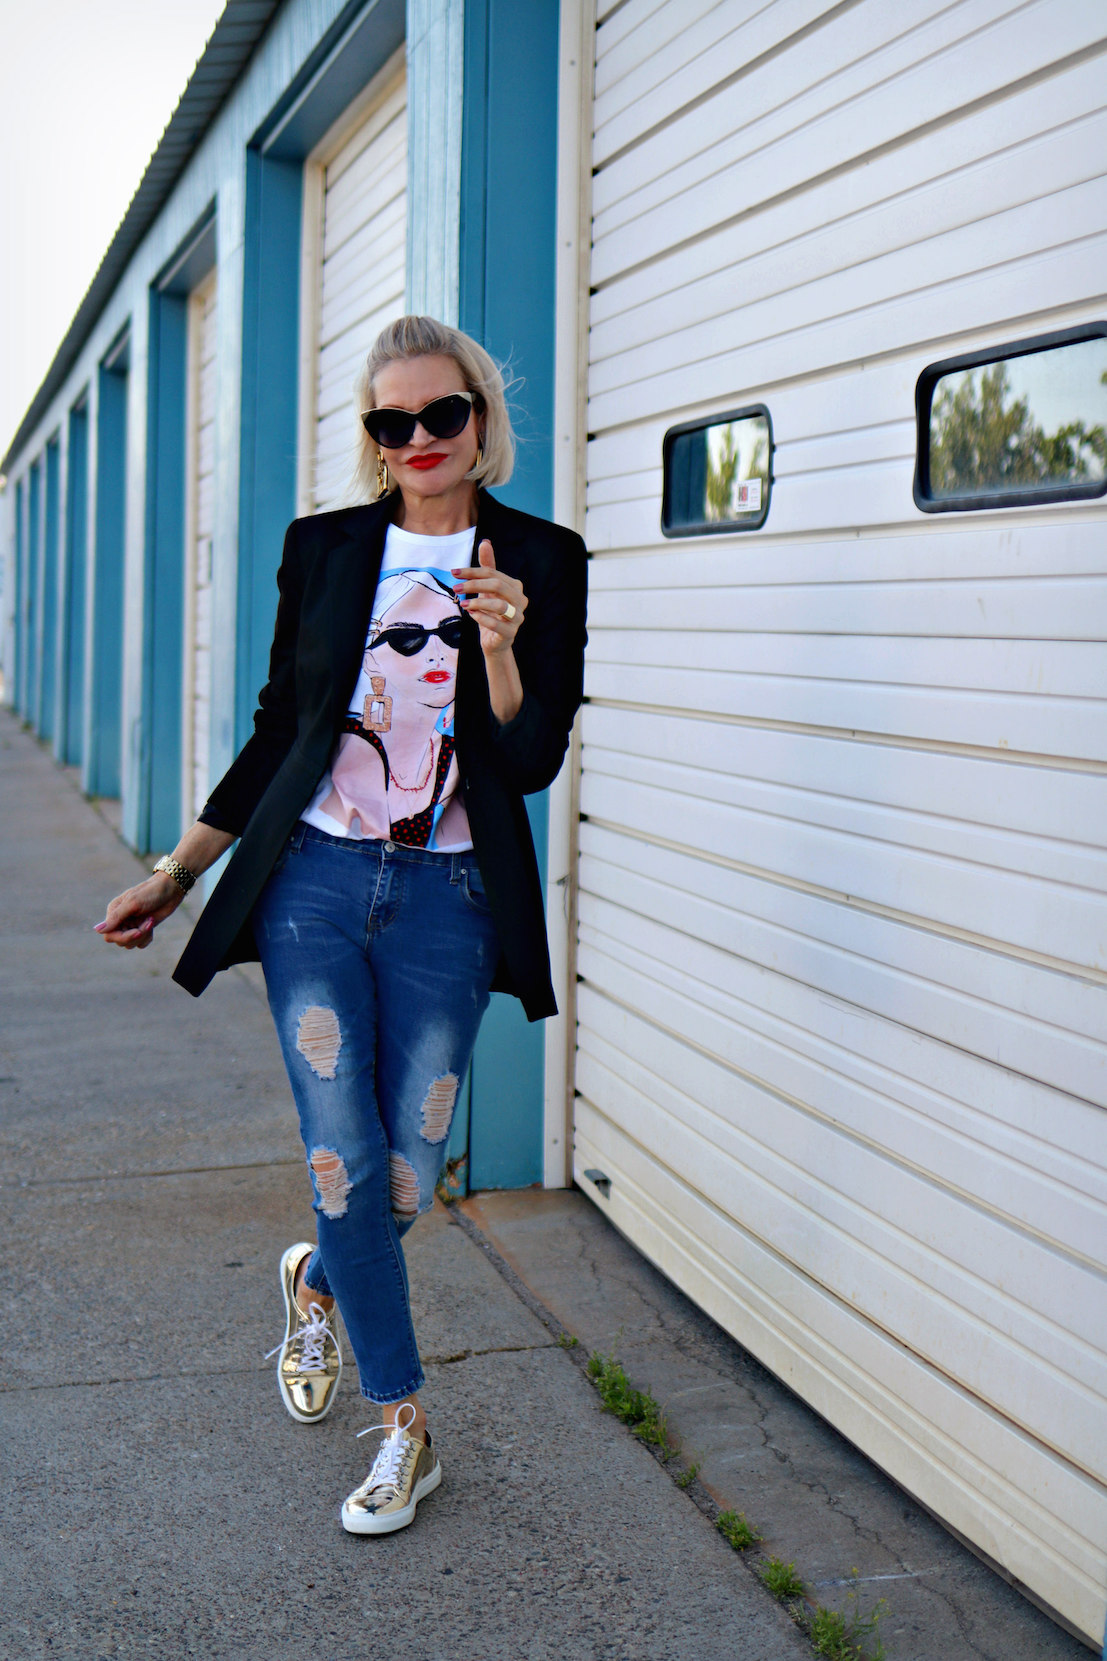 Lifestyle Blogger, Jamie Lewinger of More Than Turquoise, wearing gold metallic sneakers